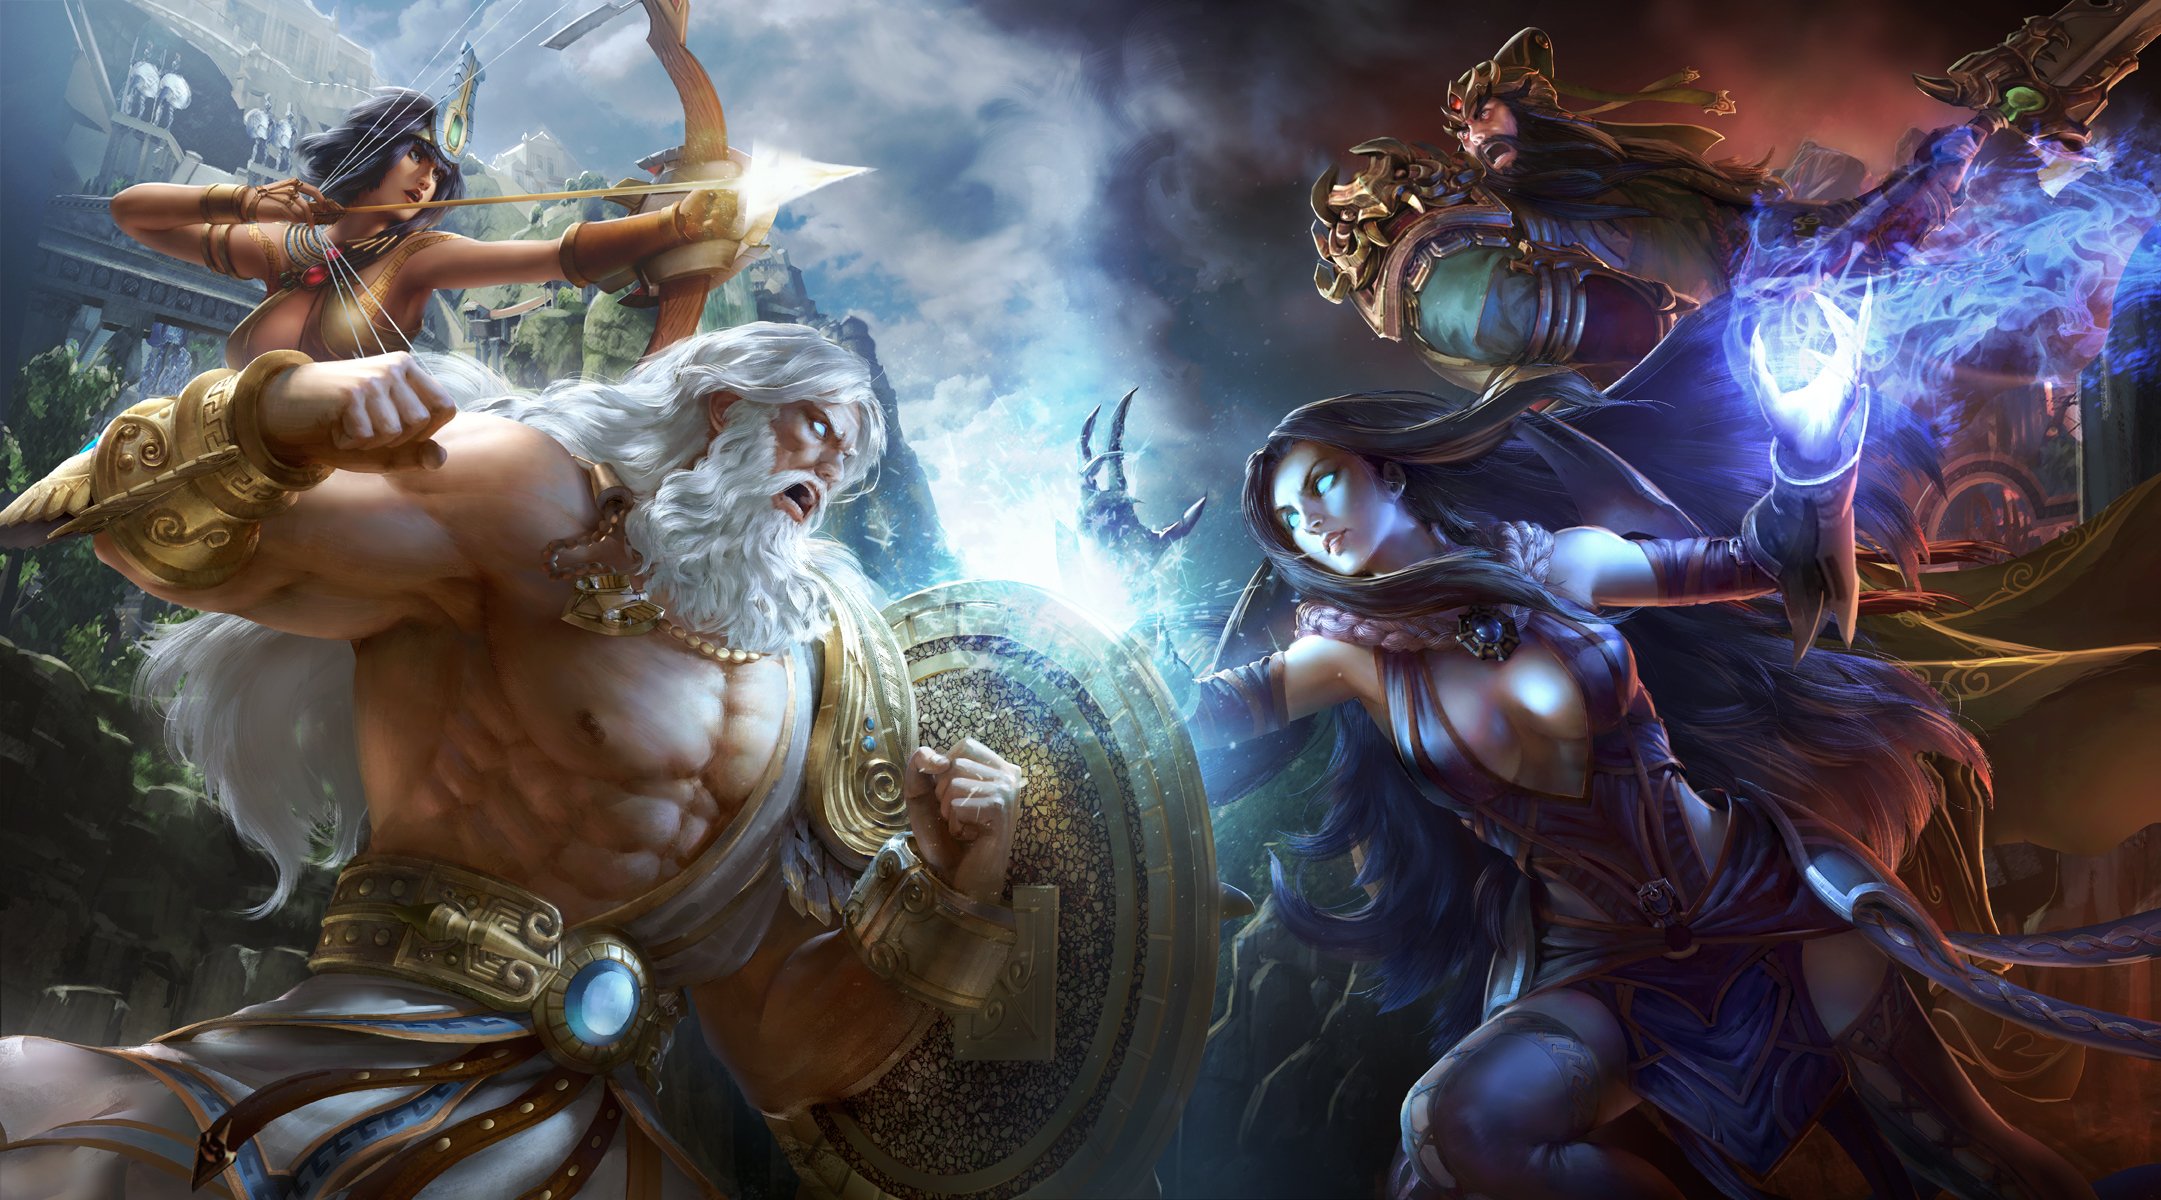 A selection of gods facing off in battle in Smite.